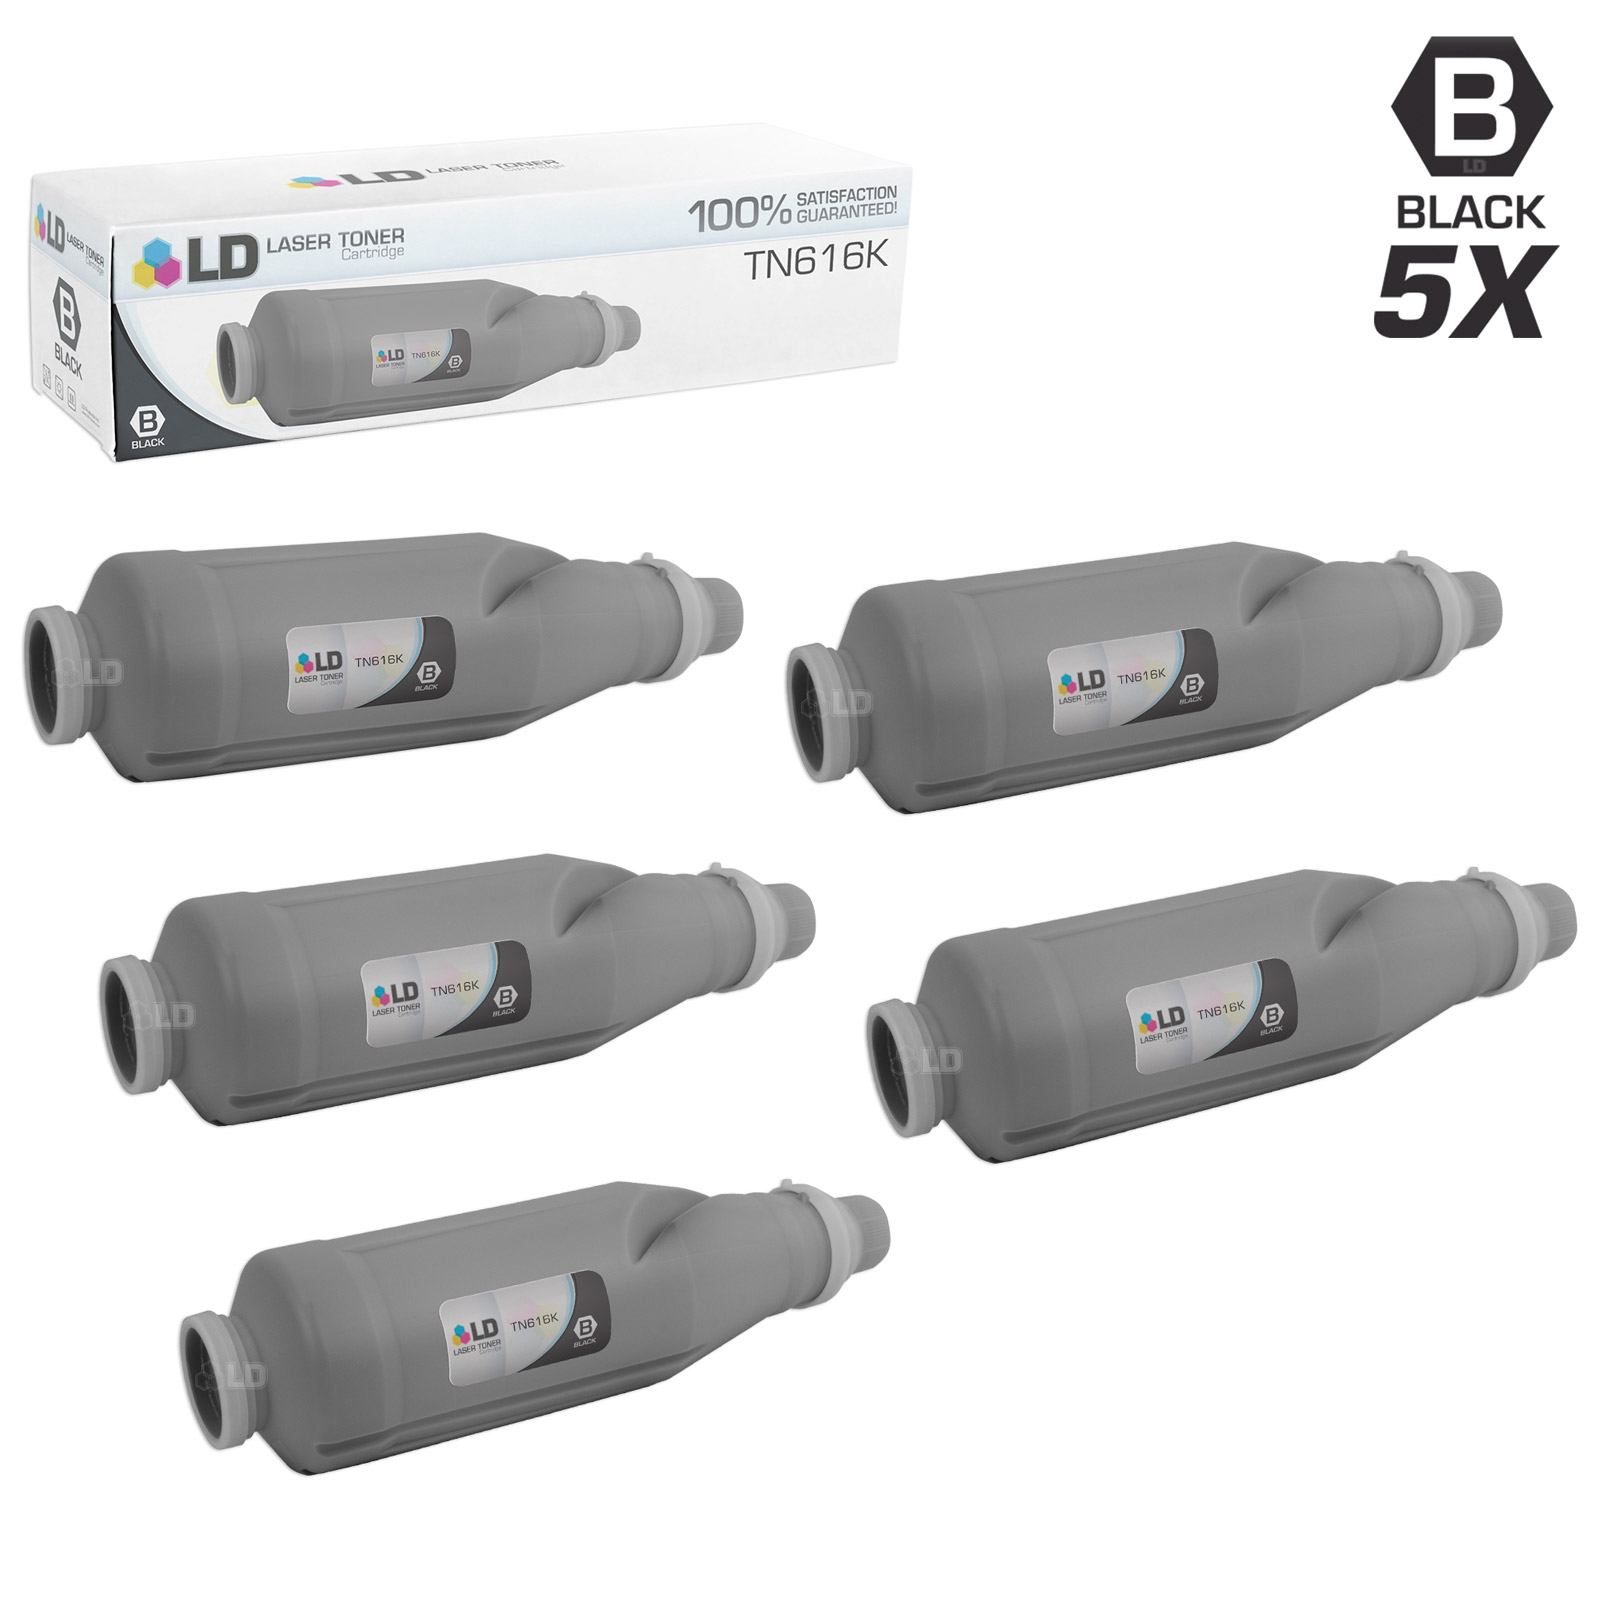 LD Compatible Replacements for Konica-Minolta A1U9130 / TN616K Set of 5 Black Laser Toner Cartridges for use in Konica-Minolta Bizhub PRESS C6000, C7000, and C7000P s - image 1 of 1